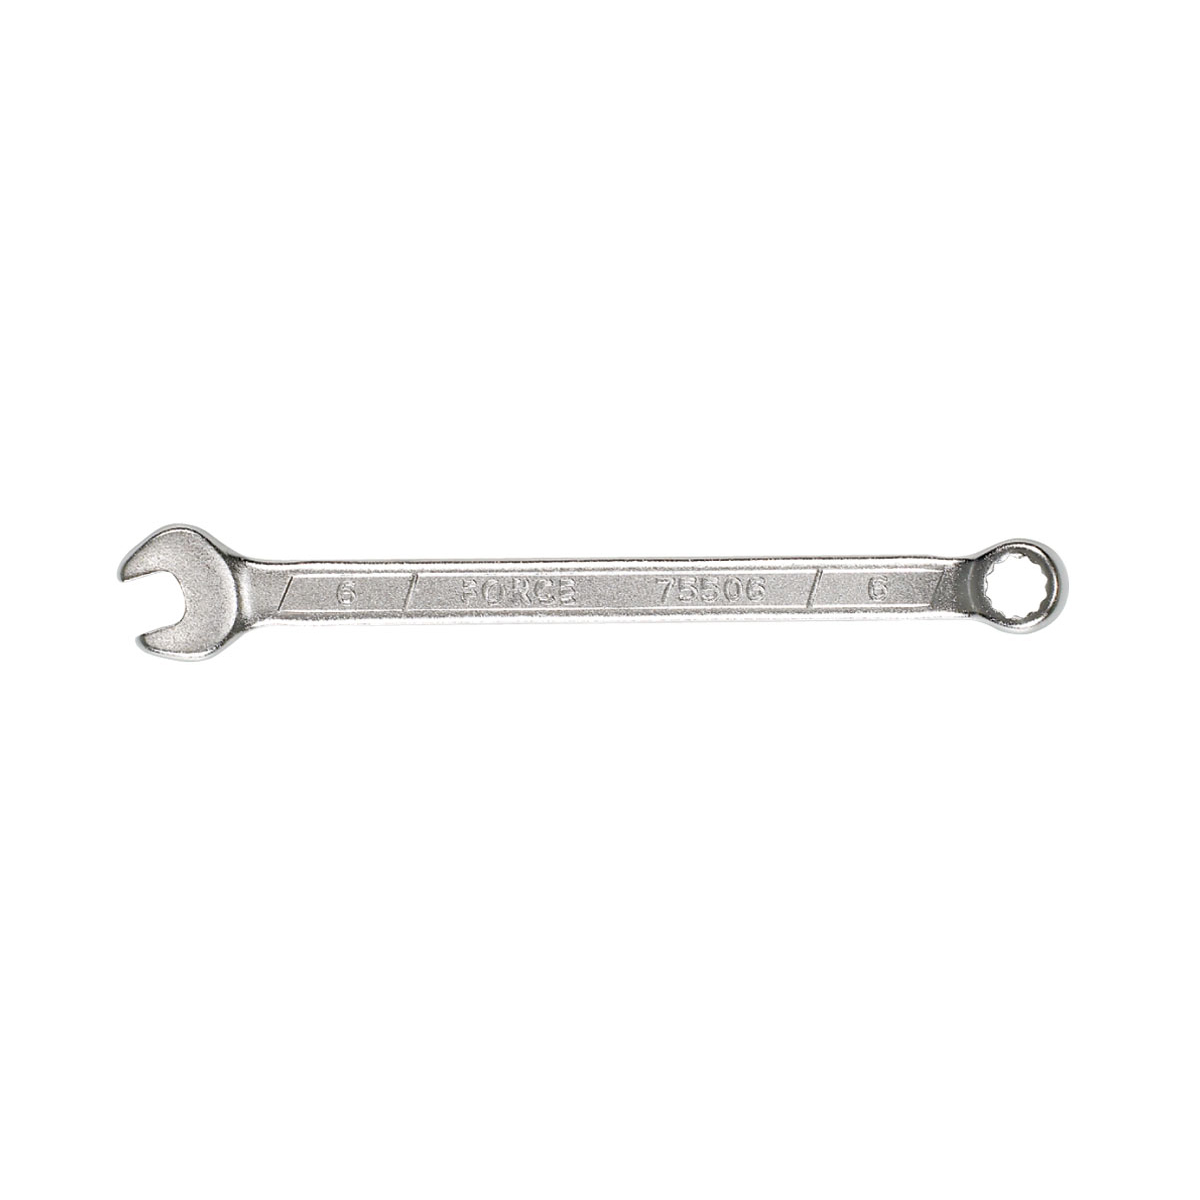 CYCLO 8mm Spanner